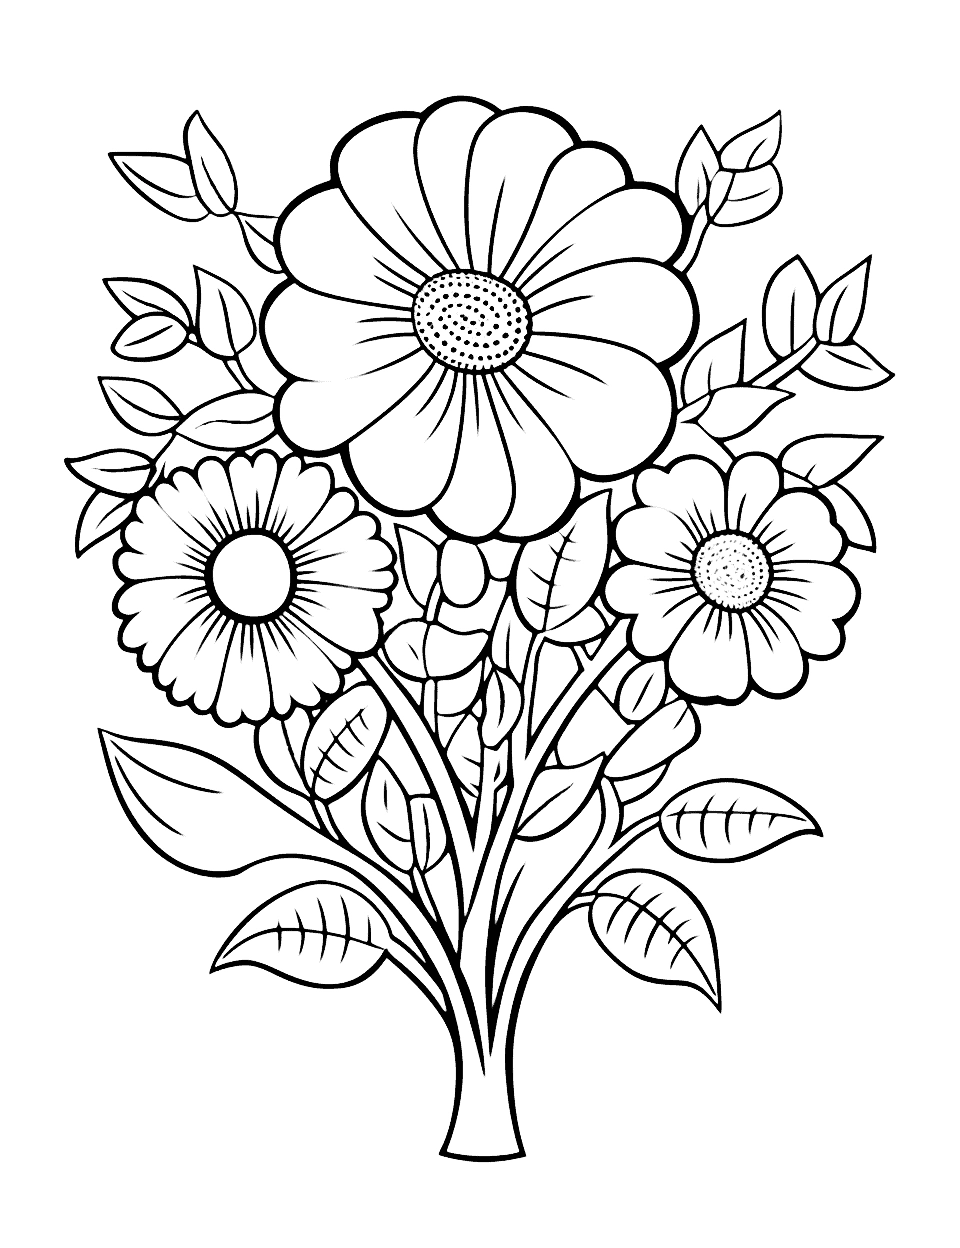 75 Flower Coloring Pages: Free Printable Sheets pertaining to Free Printable Flower Coloring Pages